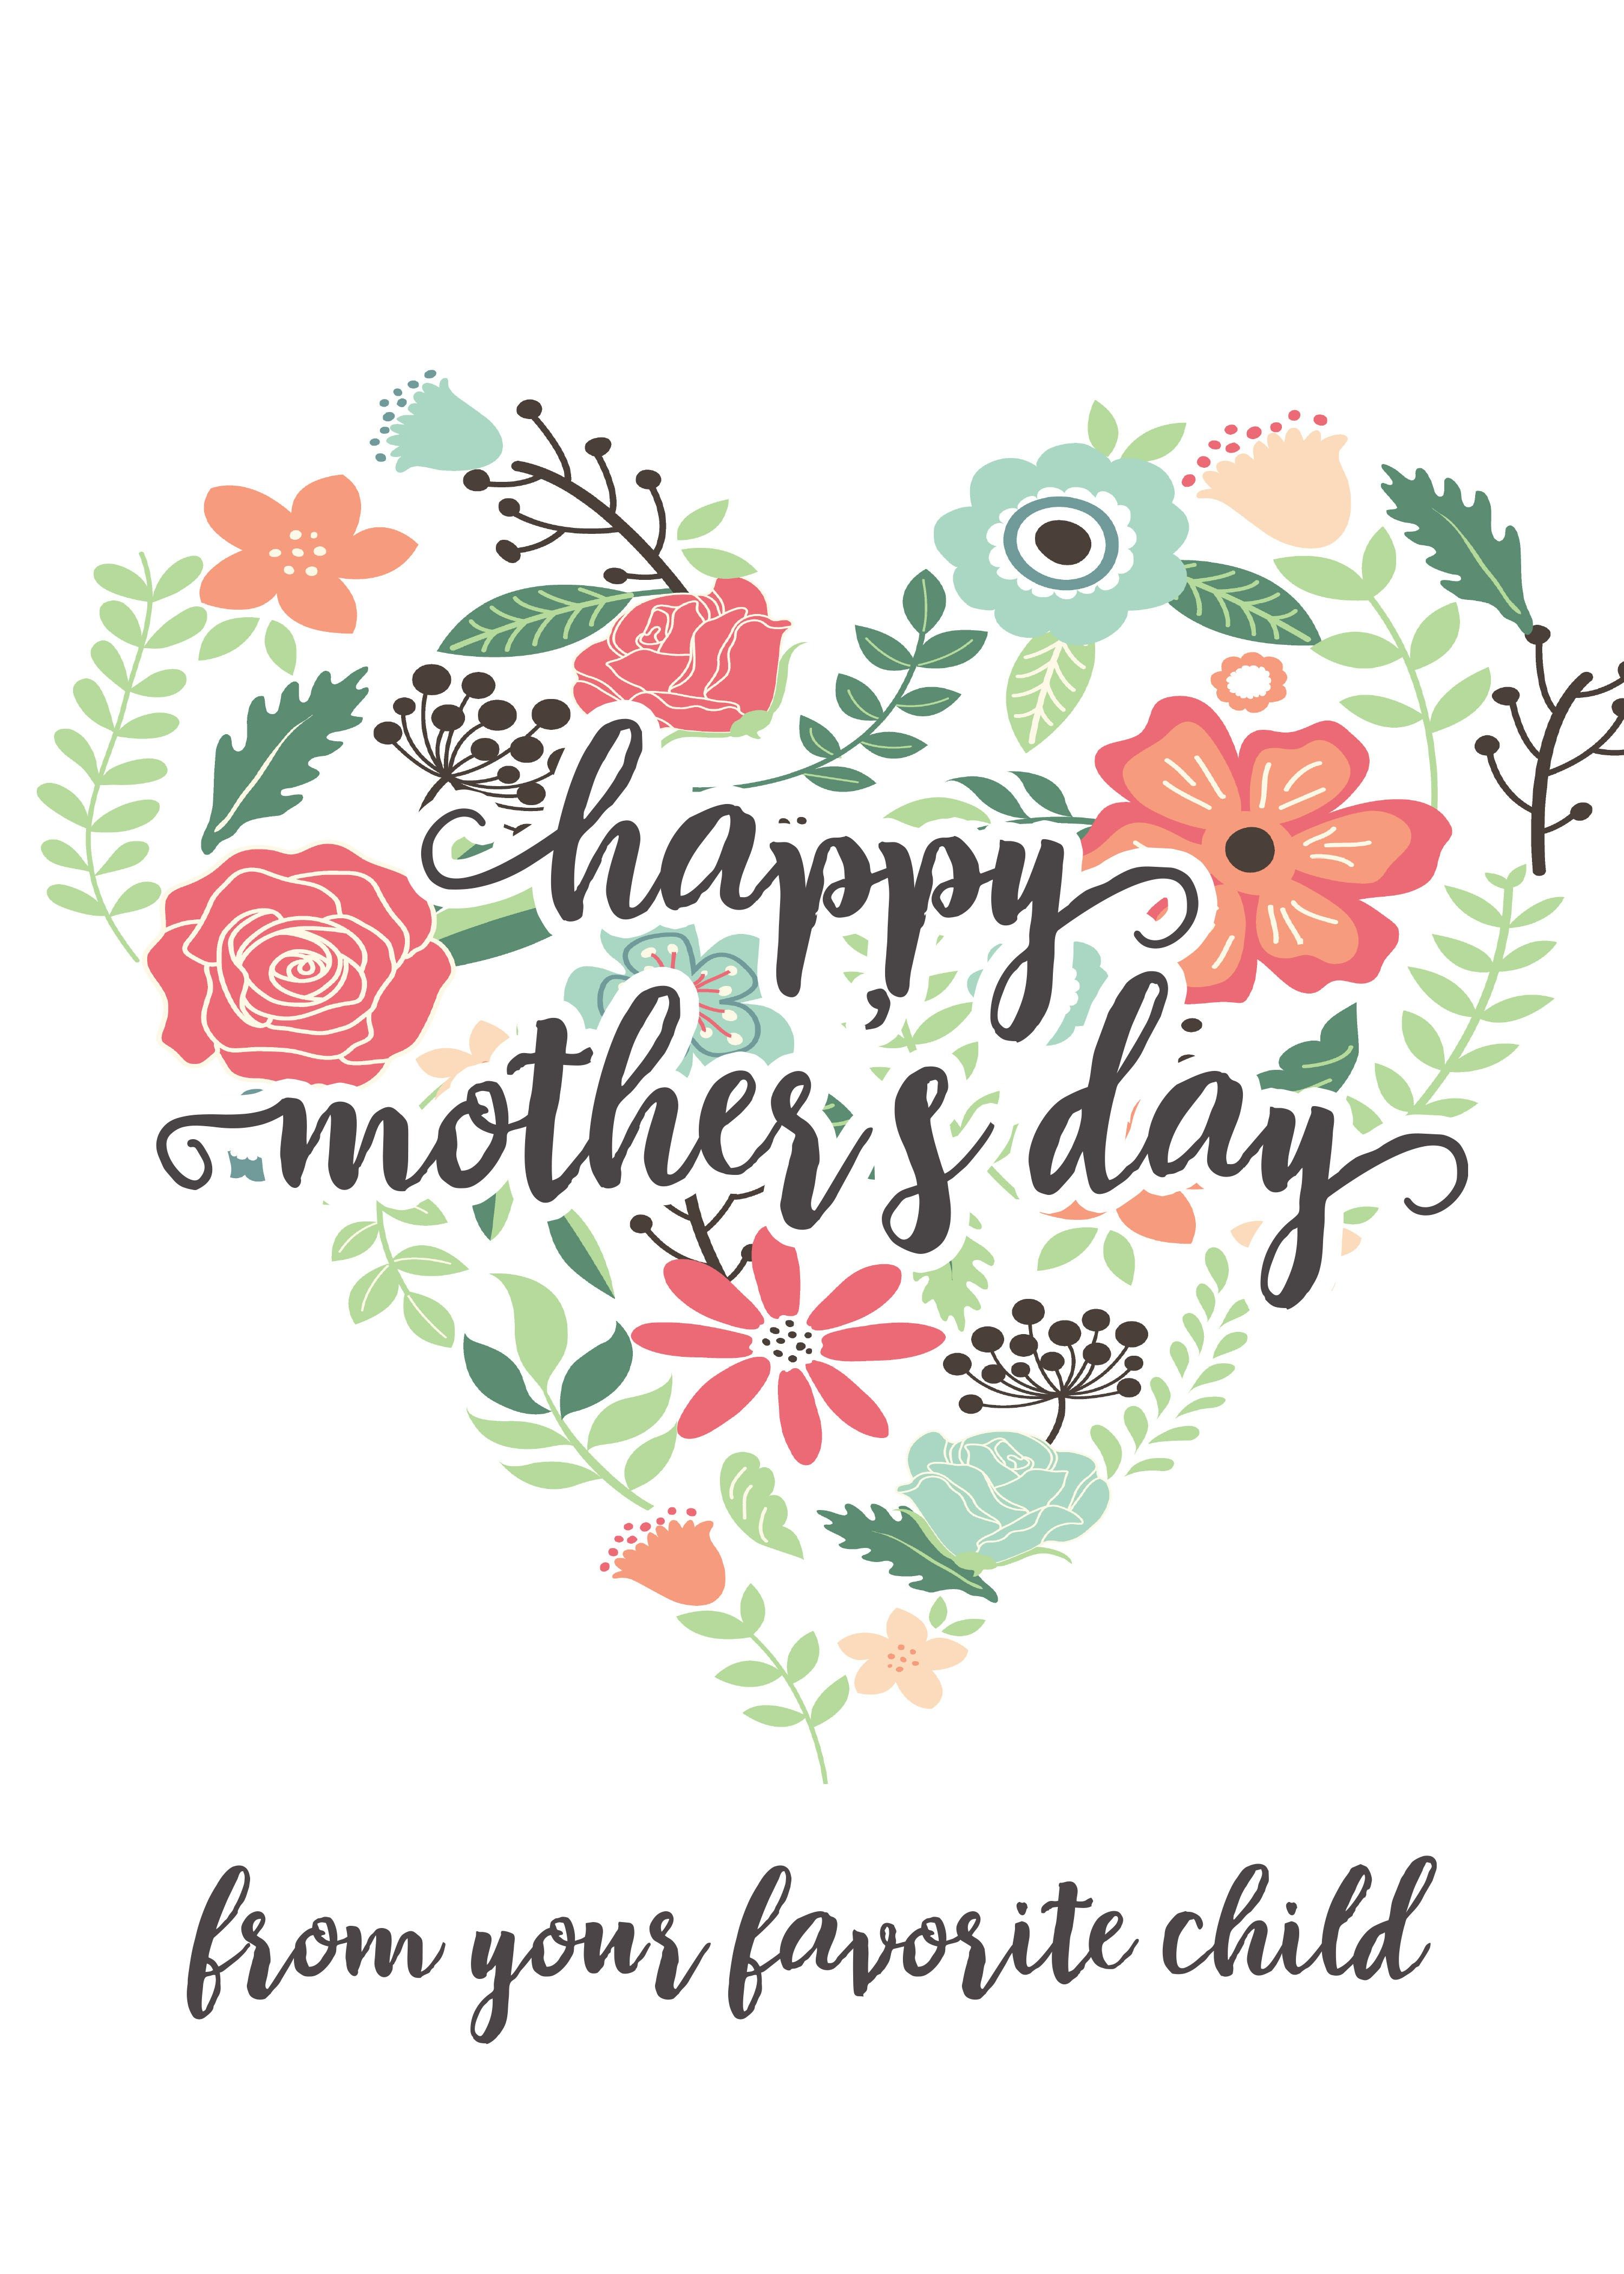 Happy Mothers Day Messages Free Printable Mothers Day Cards @forkidsandmoms Happy  Mothers Day - For Kids and Moms - The Modern Parents Guide to Life Blog